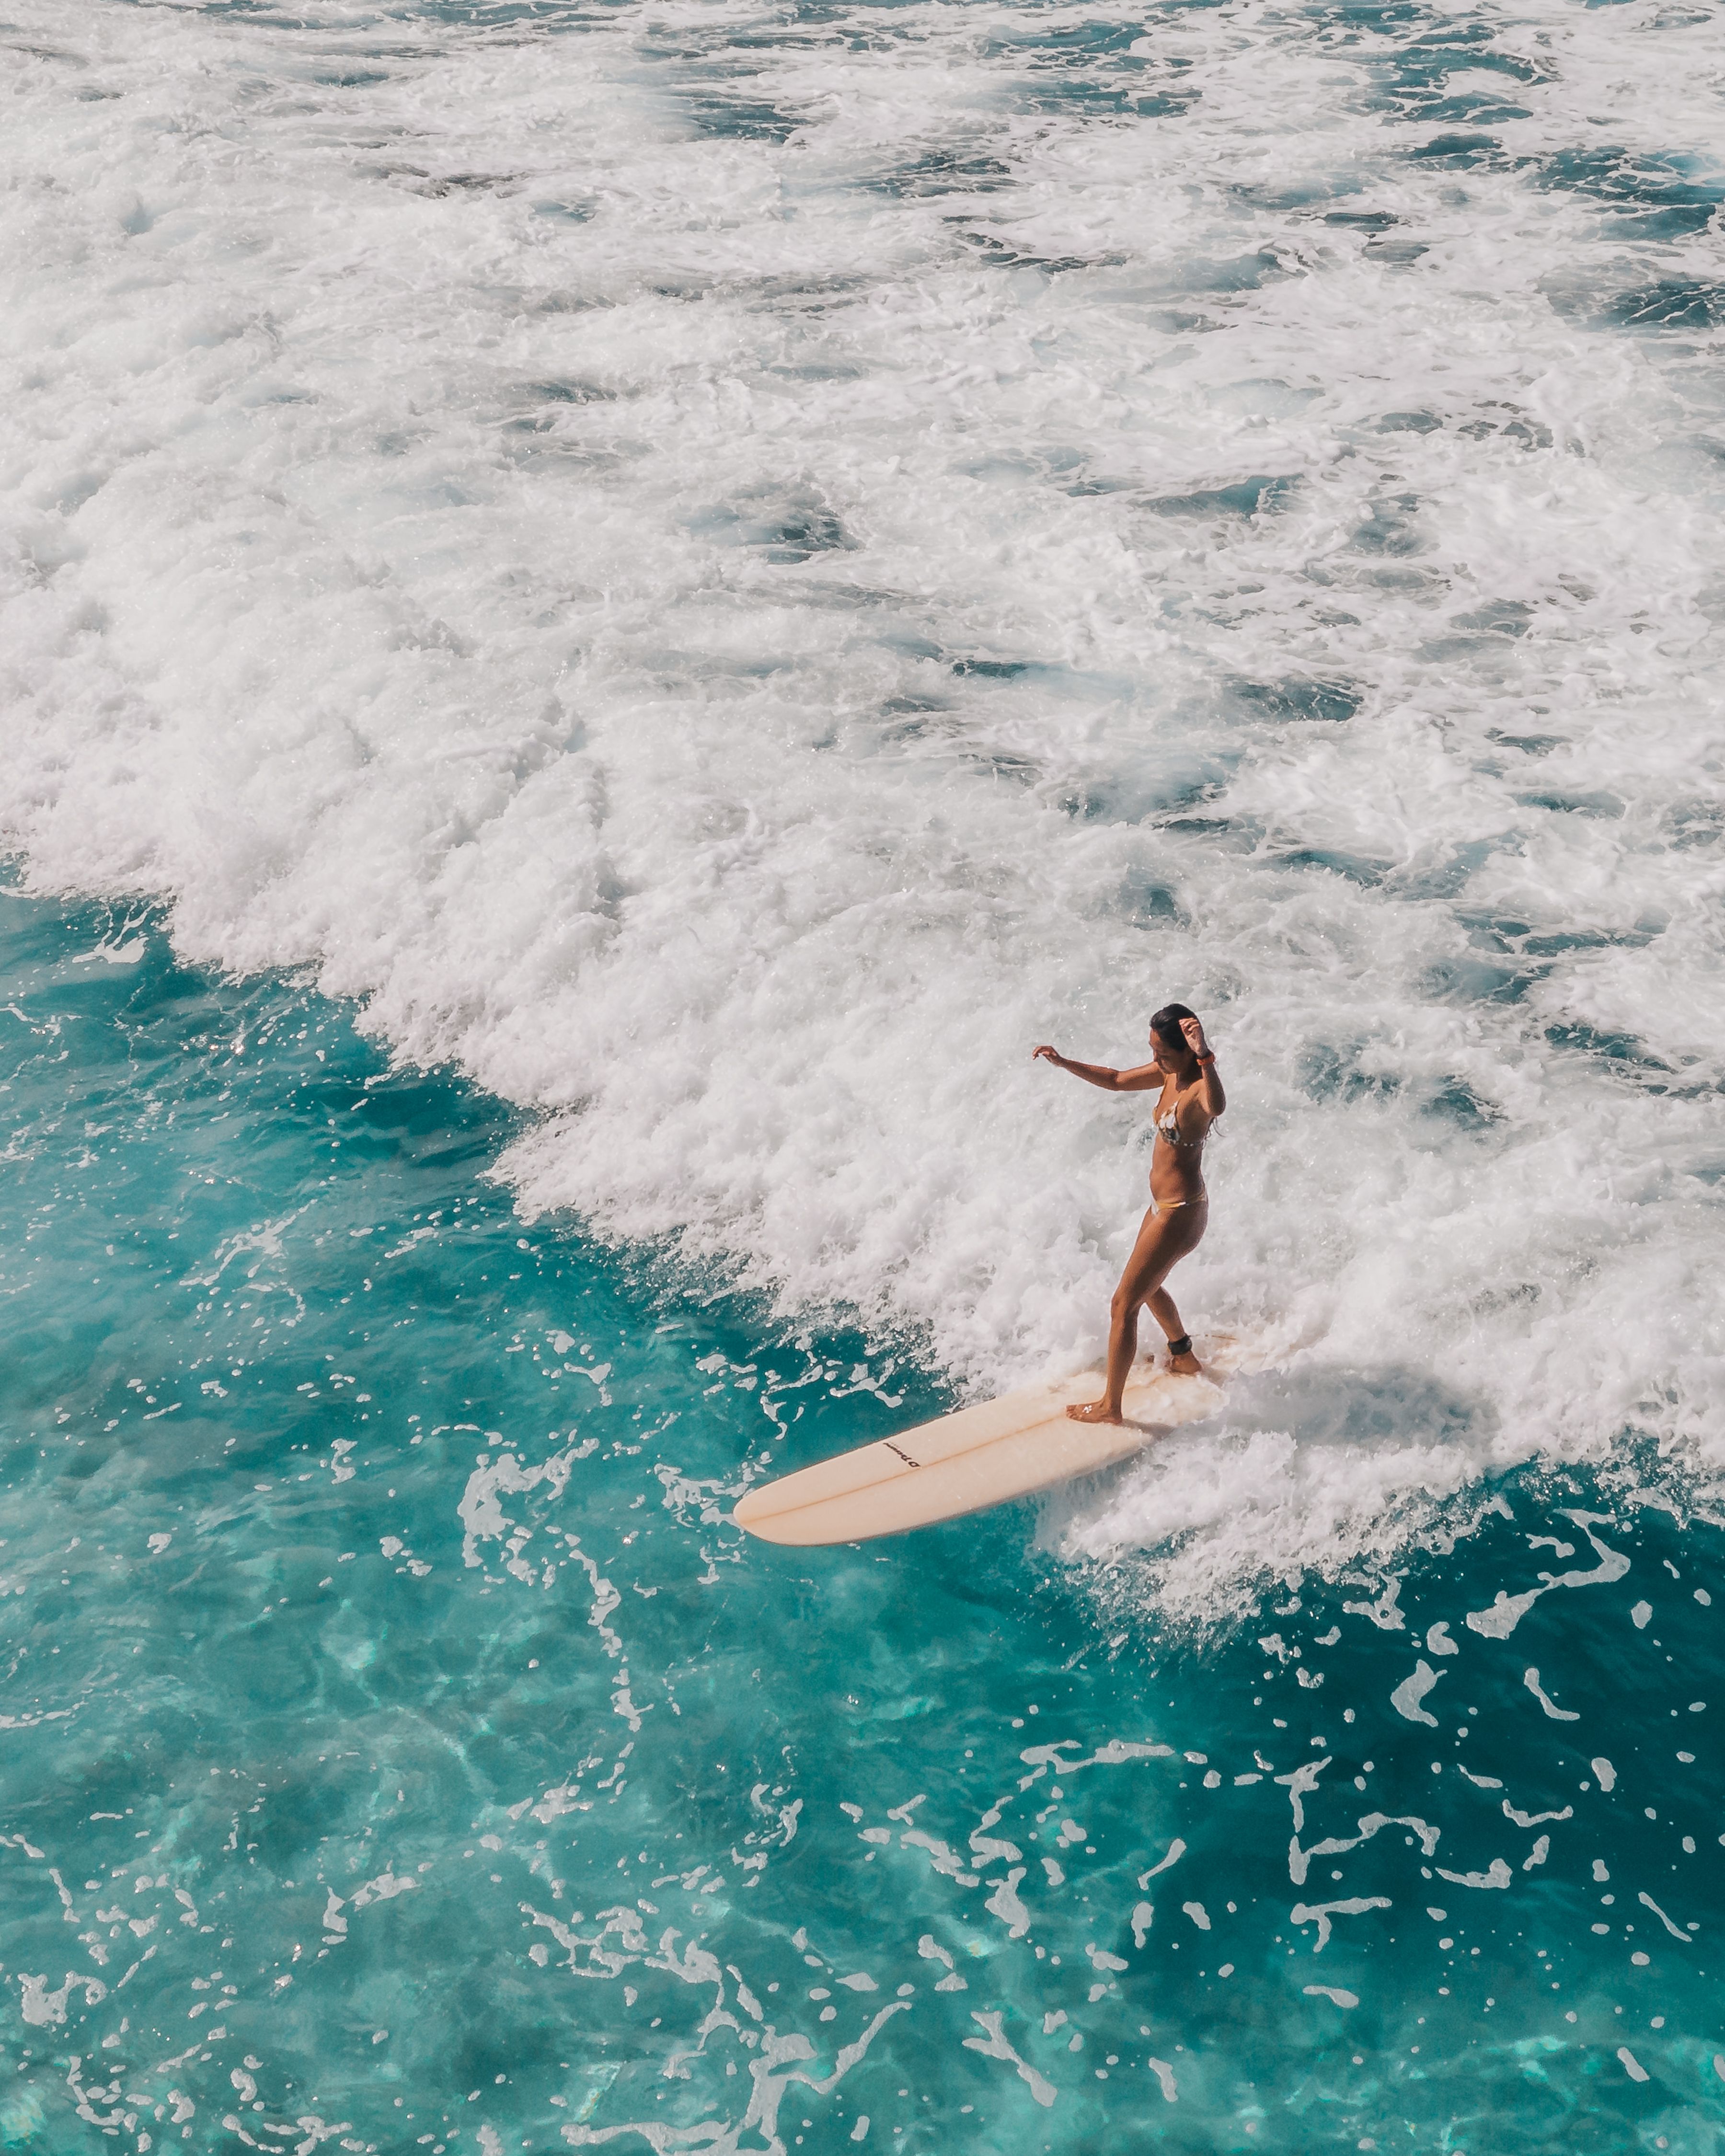 A woman in a bikini stands on a surfboard riding a wave. - Surf